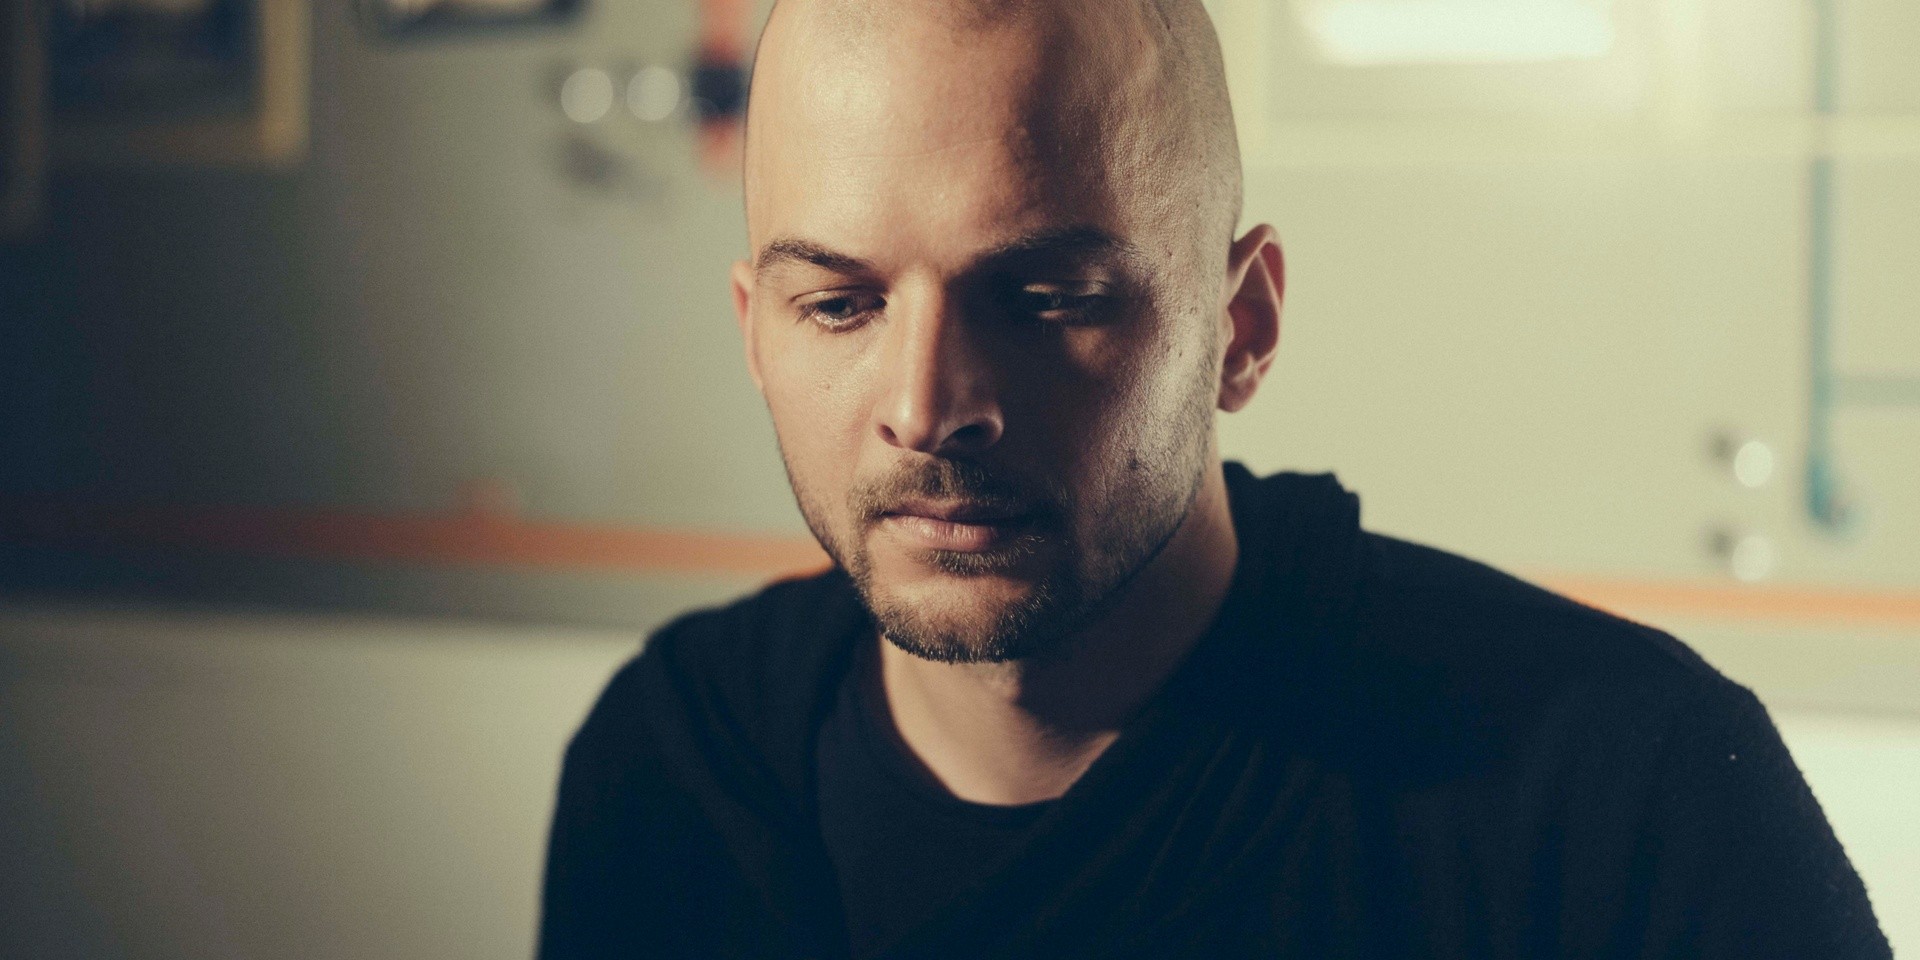 German composer Nils Frahm to play debut Singapore show in May